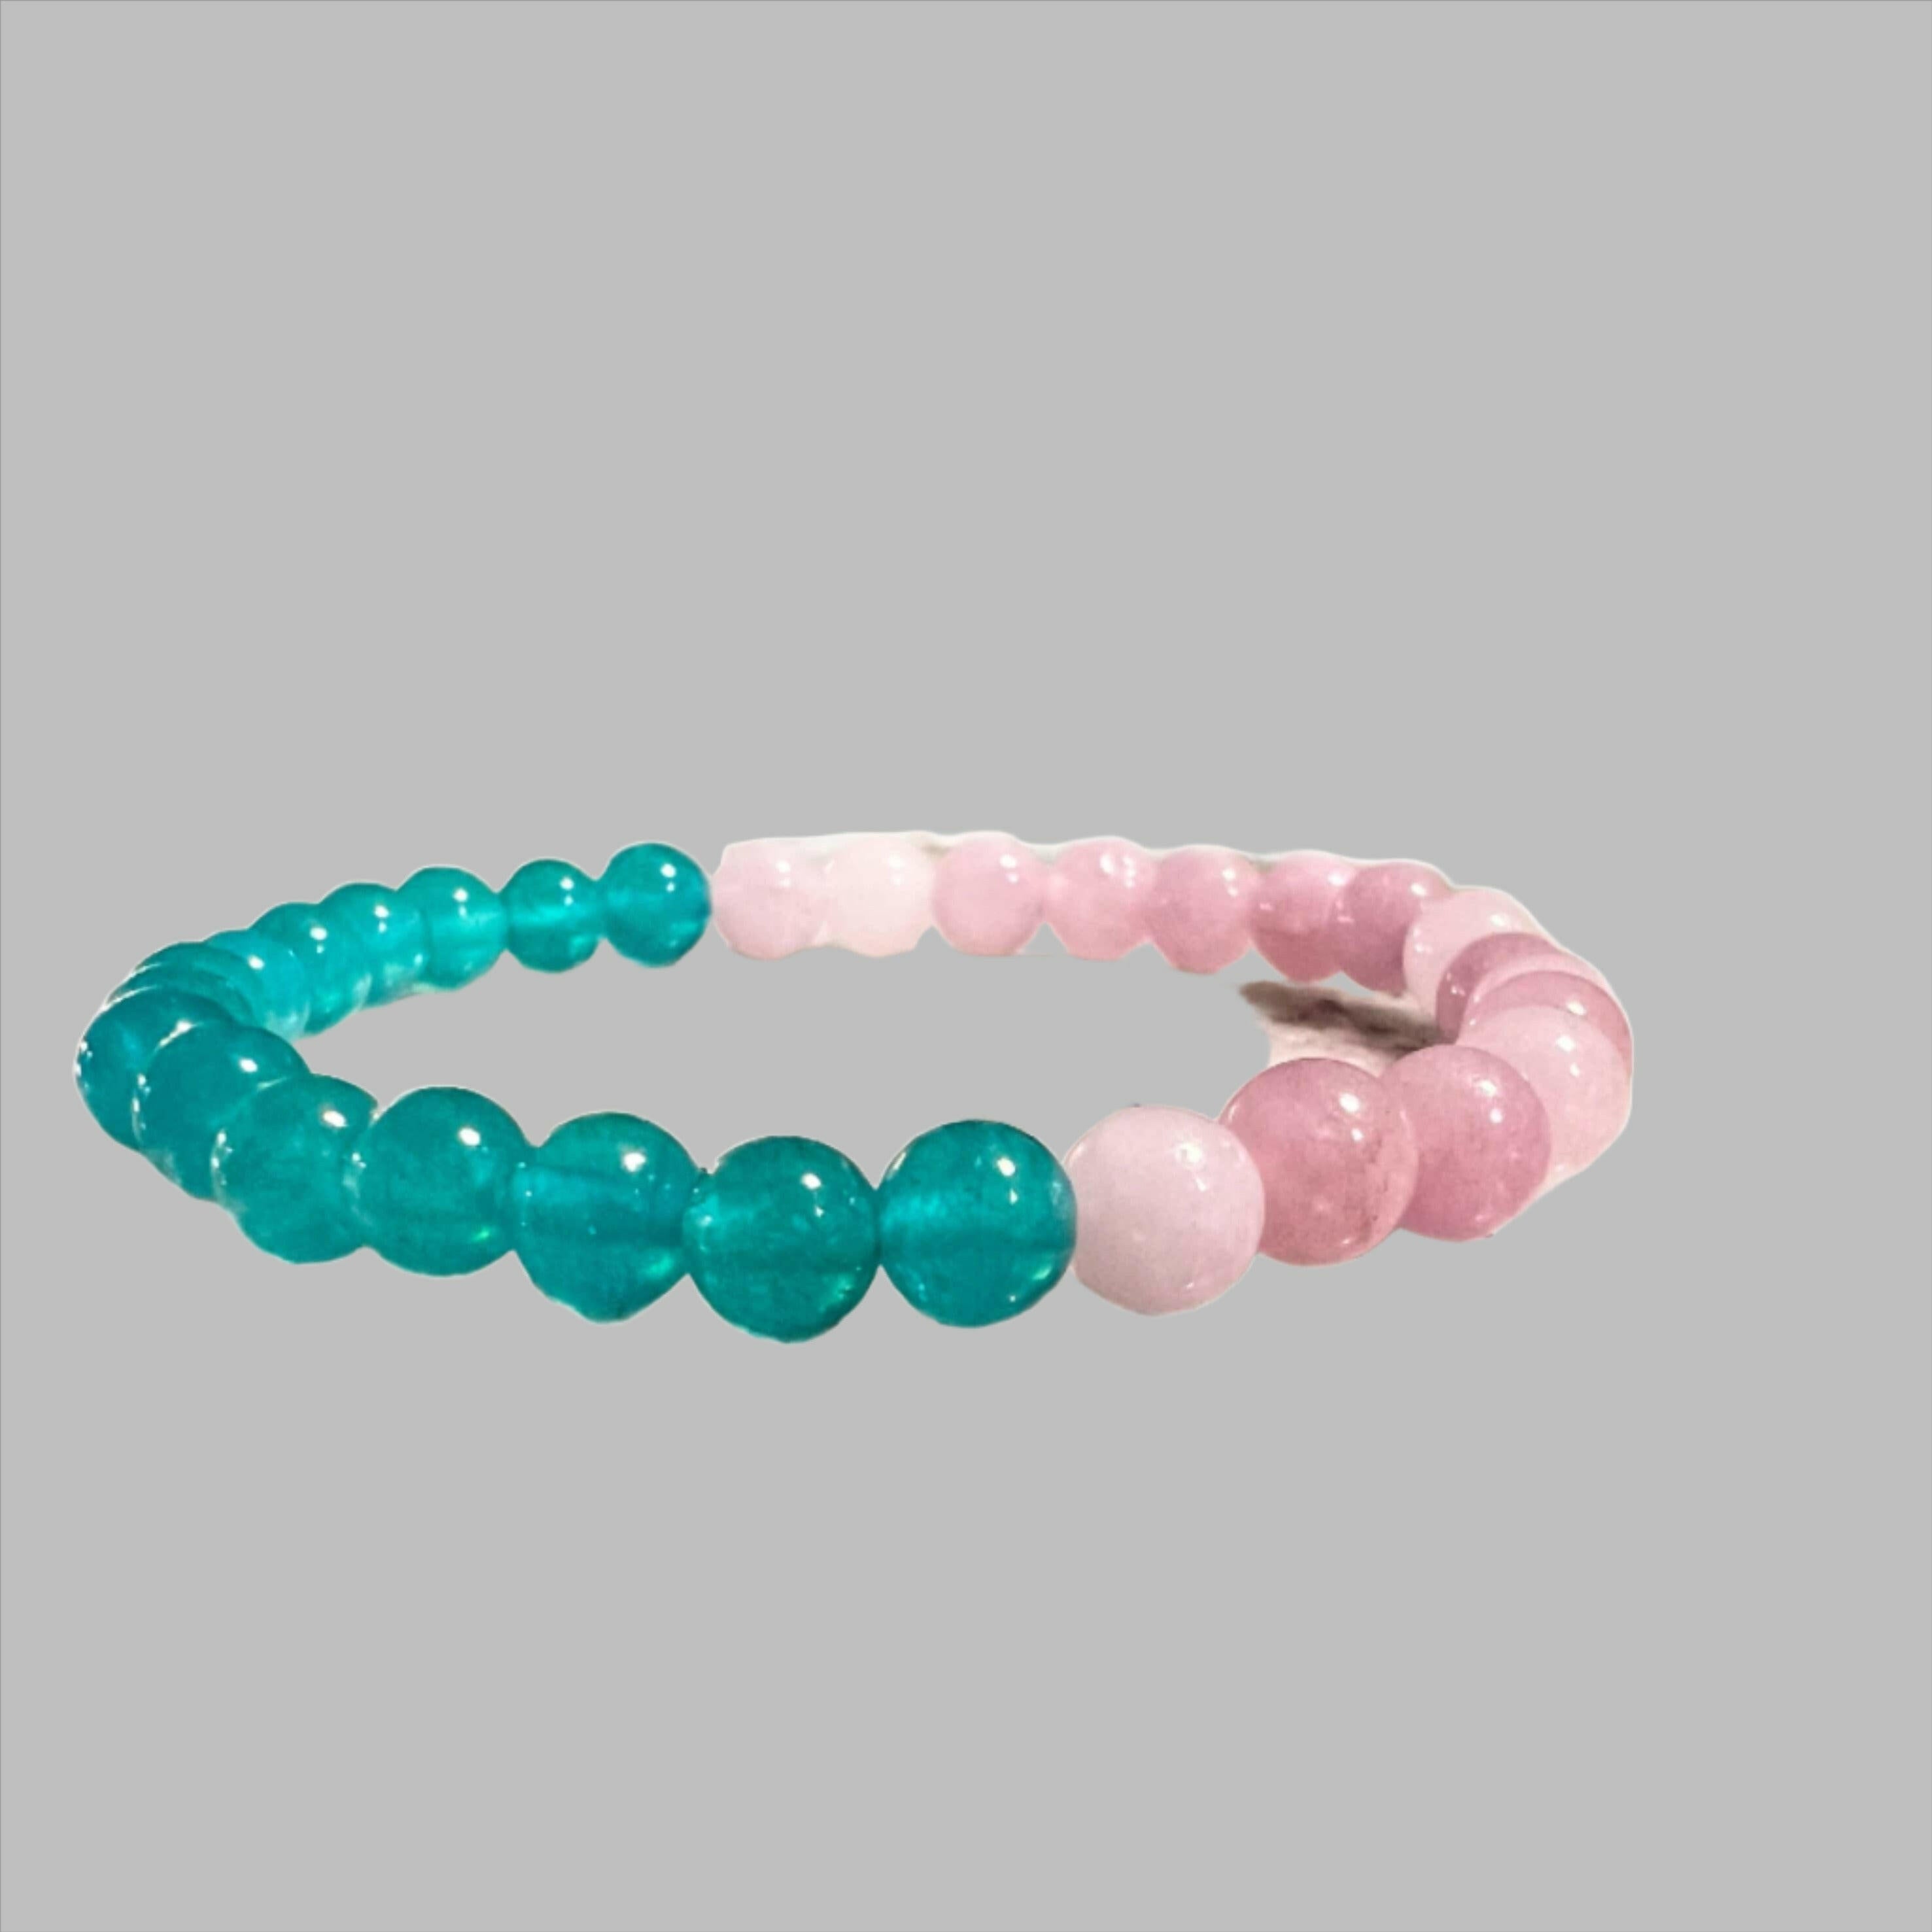 Bec Sue Jewelry Shop bracelets 6.5 / pink/blue / pink opal and blue amazonite jade "Soothing Elegance: Pink Opal and Blue Amazonite Jade 6mm Bead Stretch Bracelet for Tranquility and Harmony Tags